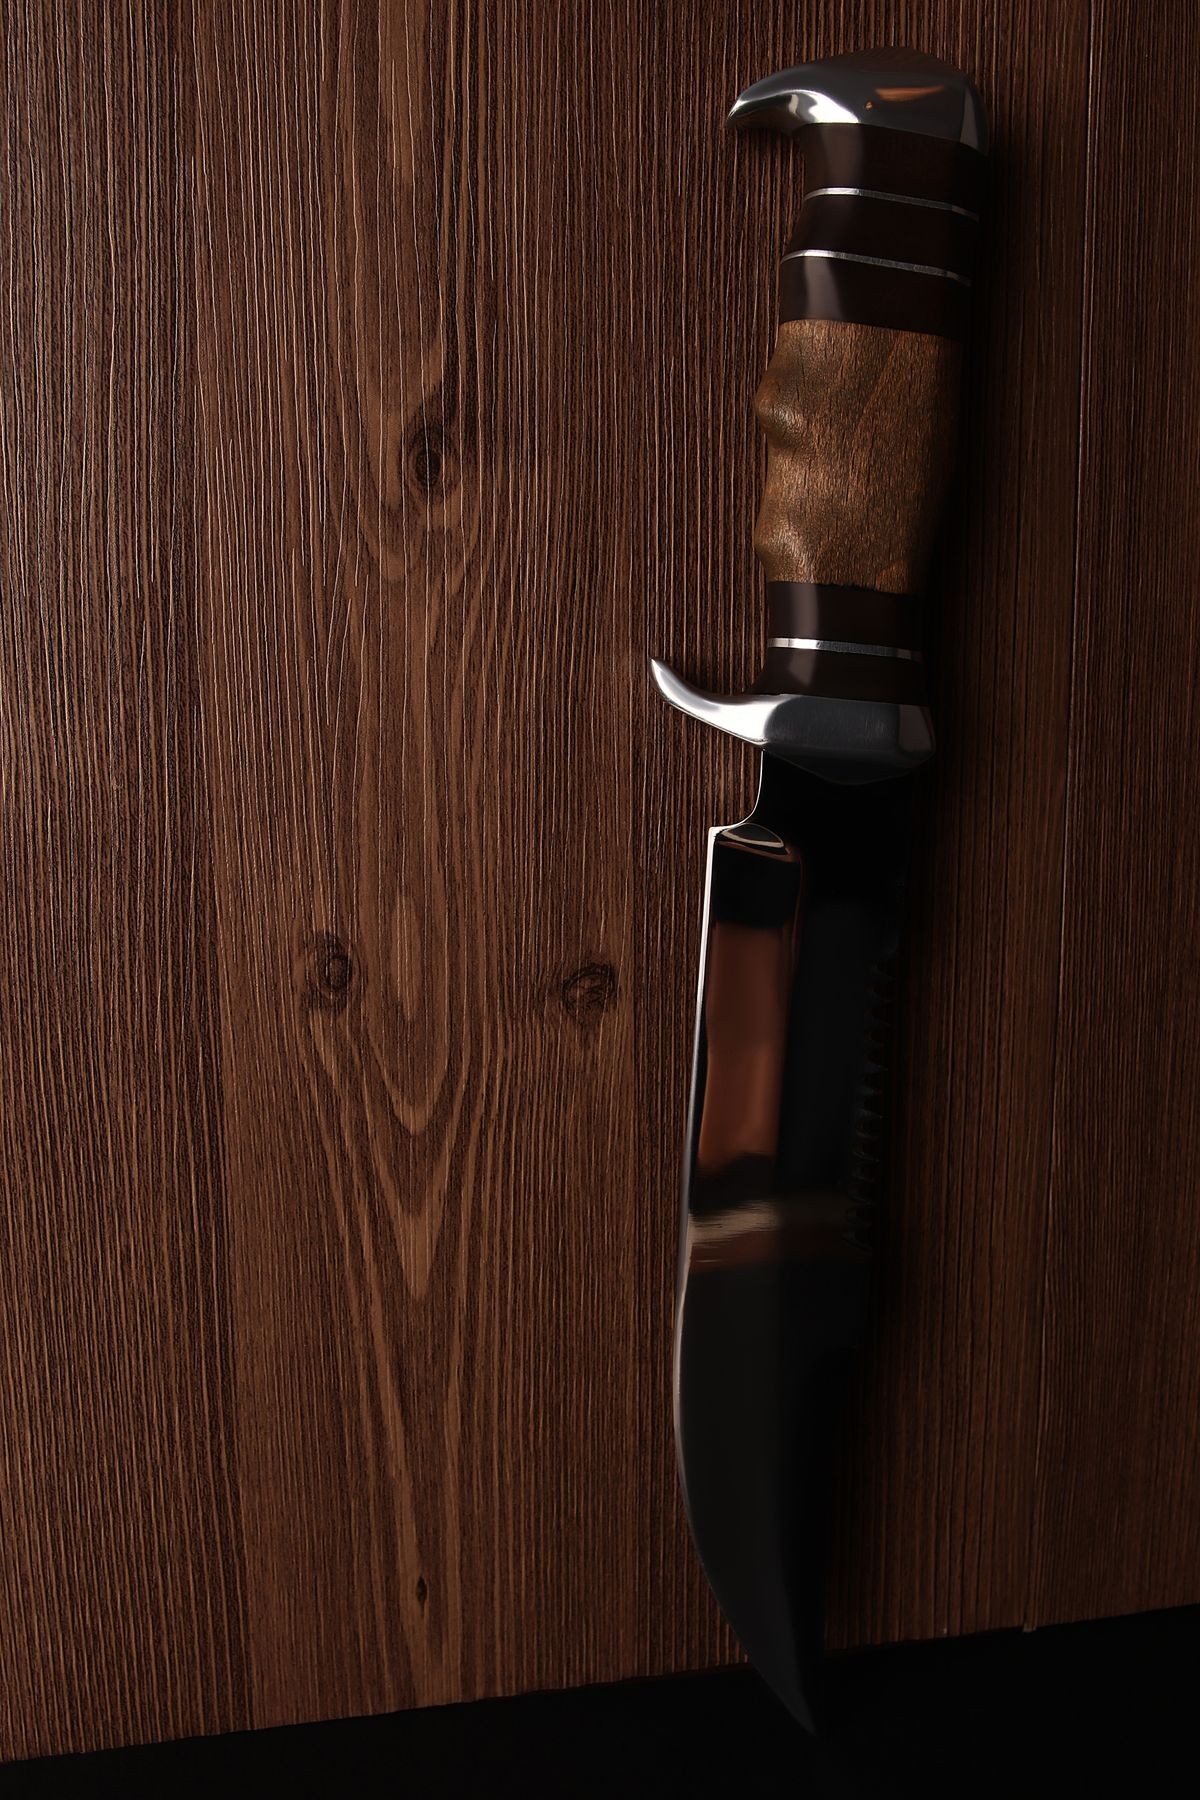 one knife with wooden handle on wooden background